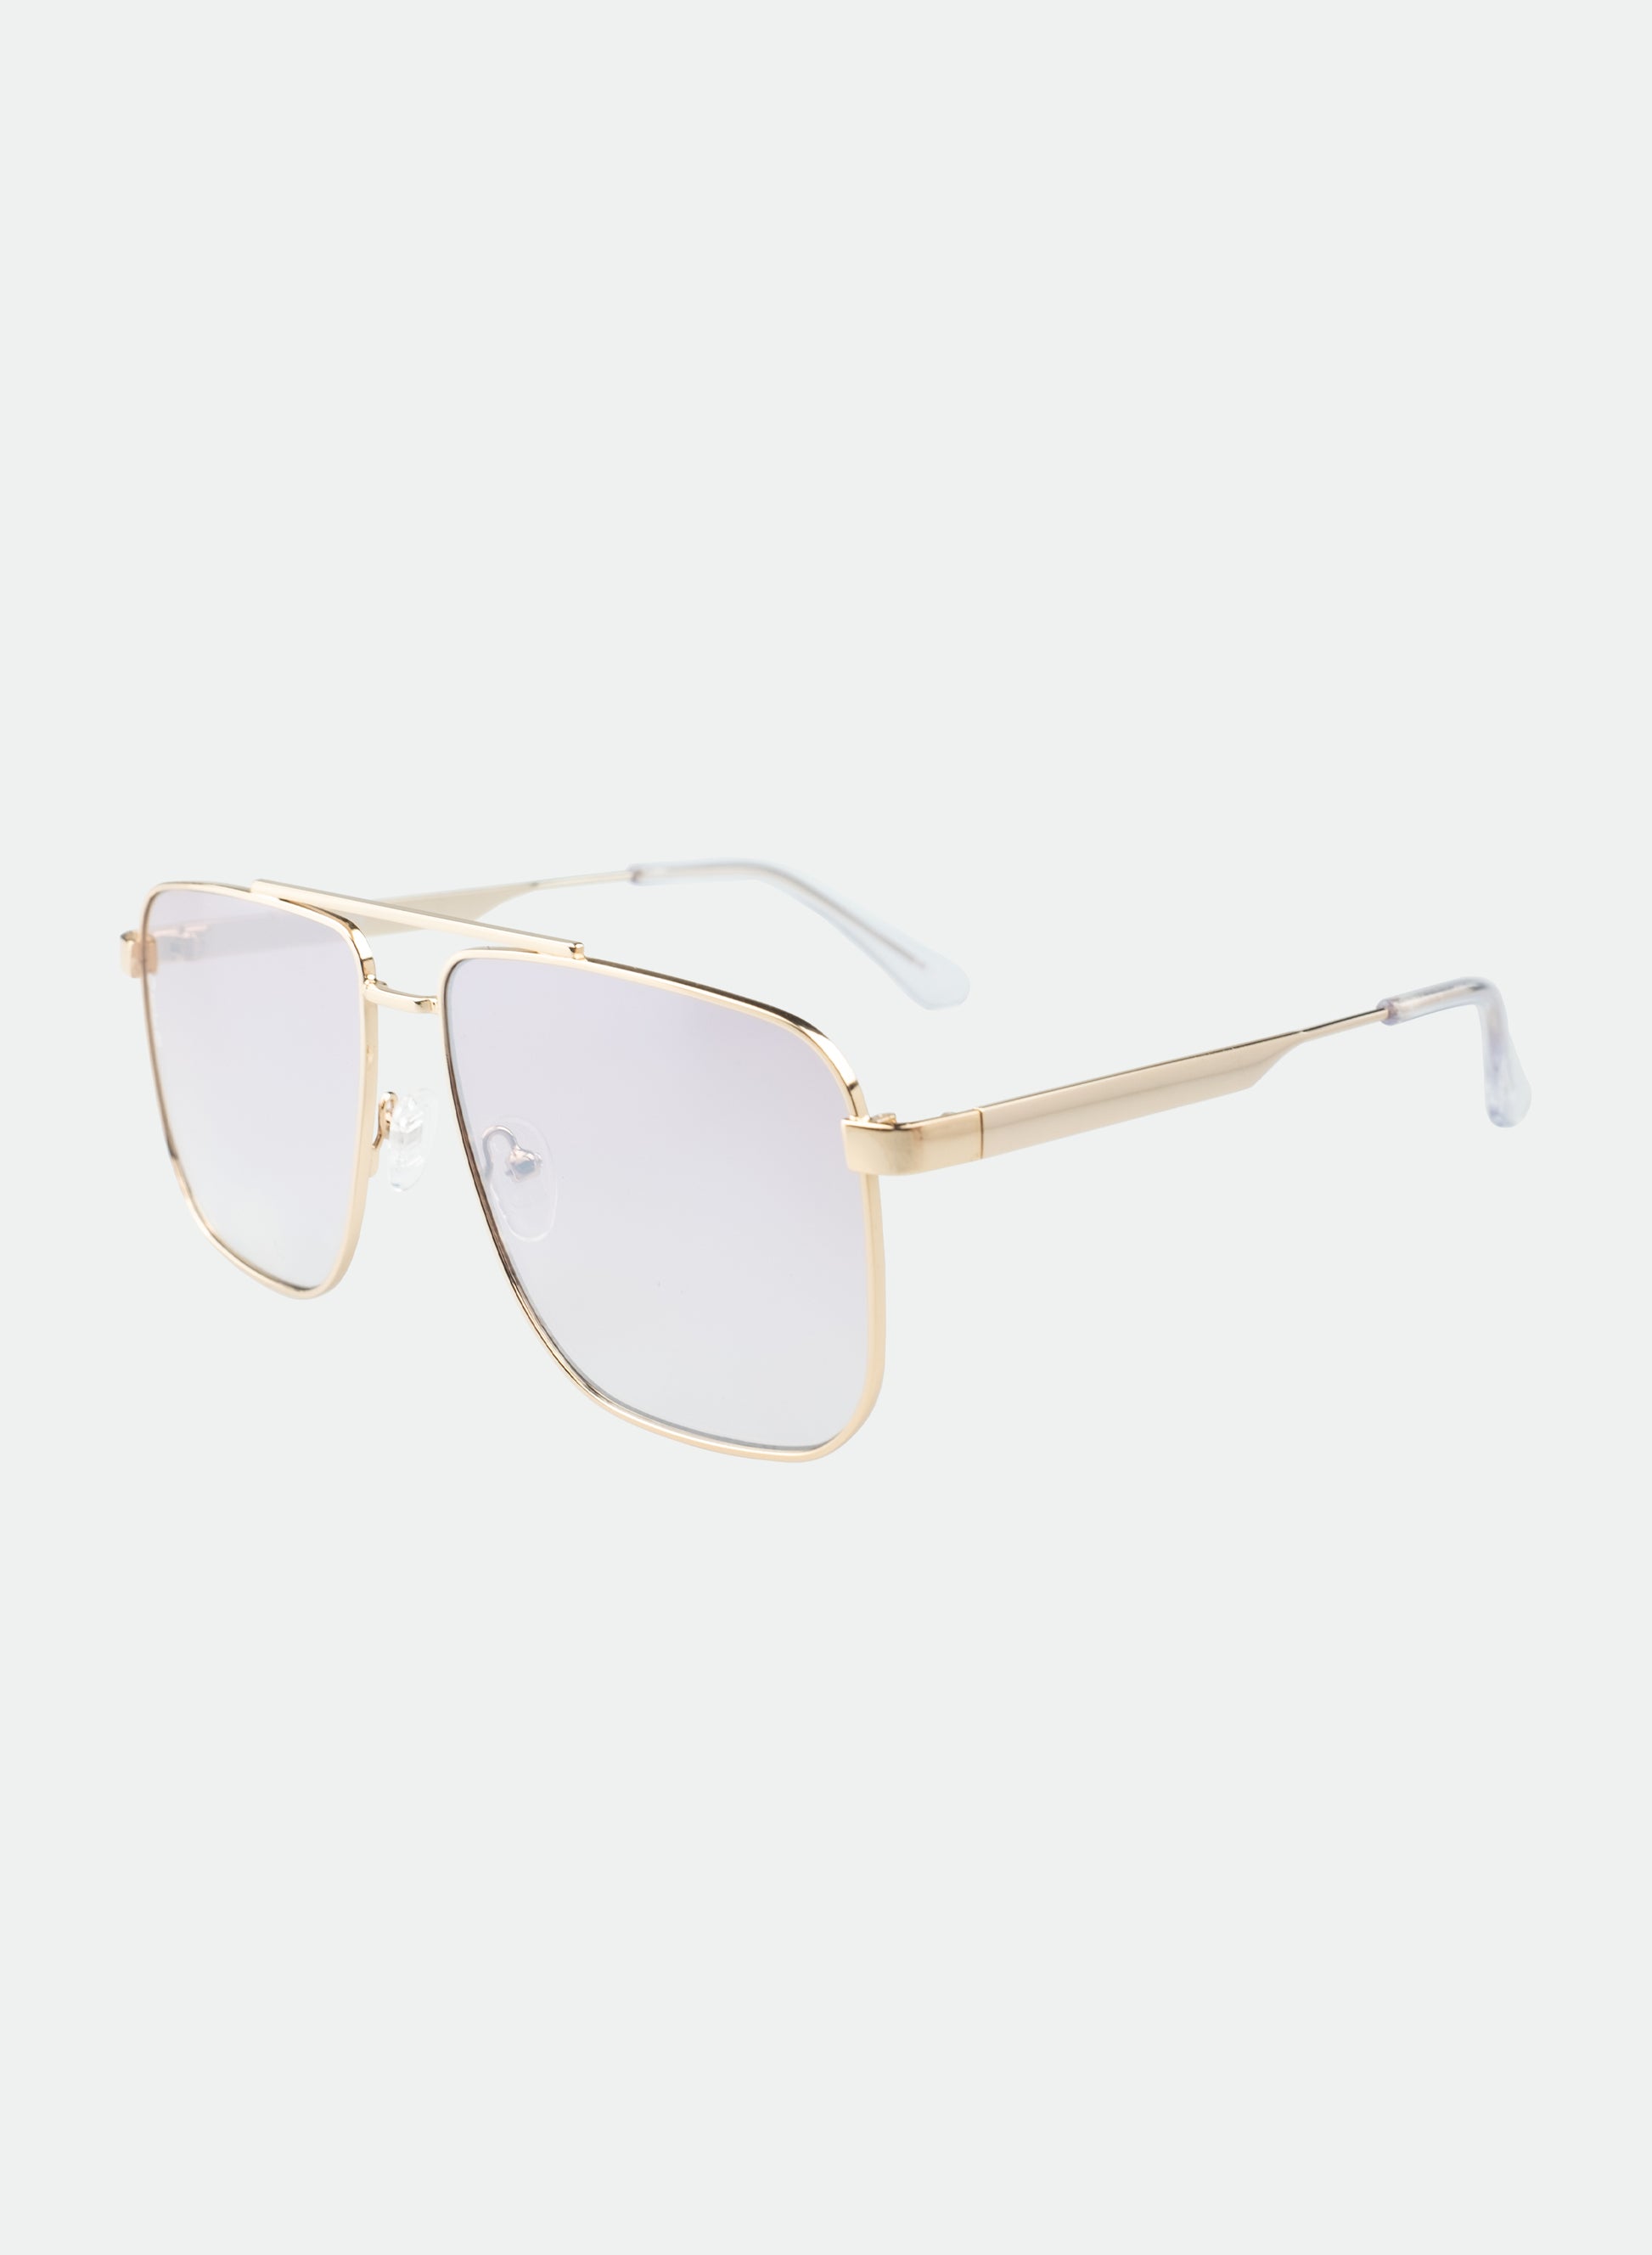 Sorrento gold pink sunglasses side view